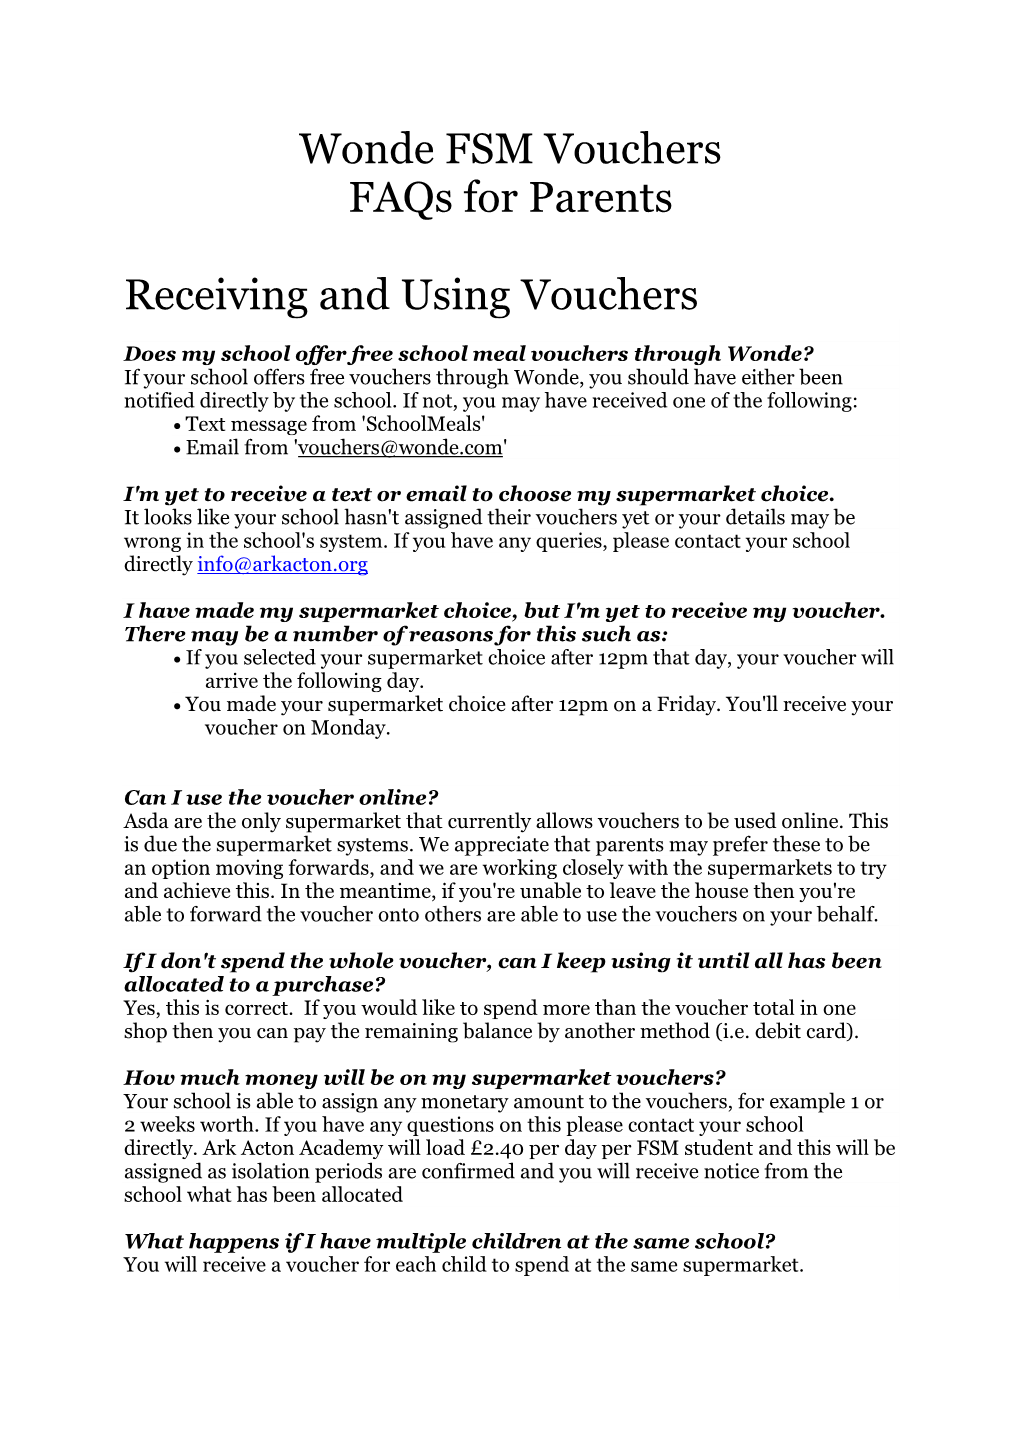 Wonde FSM Vouchers Faqs for Parents Receiving and Using